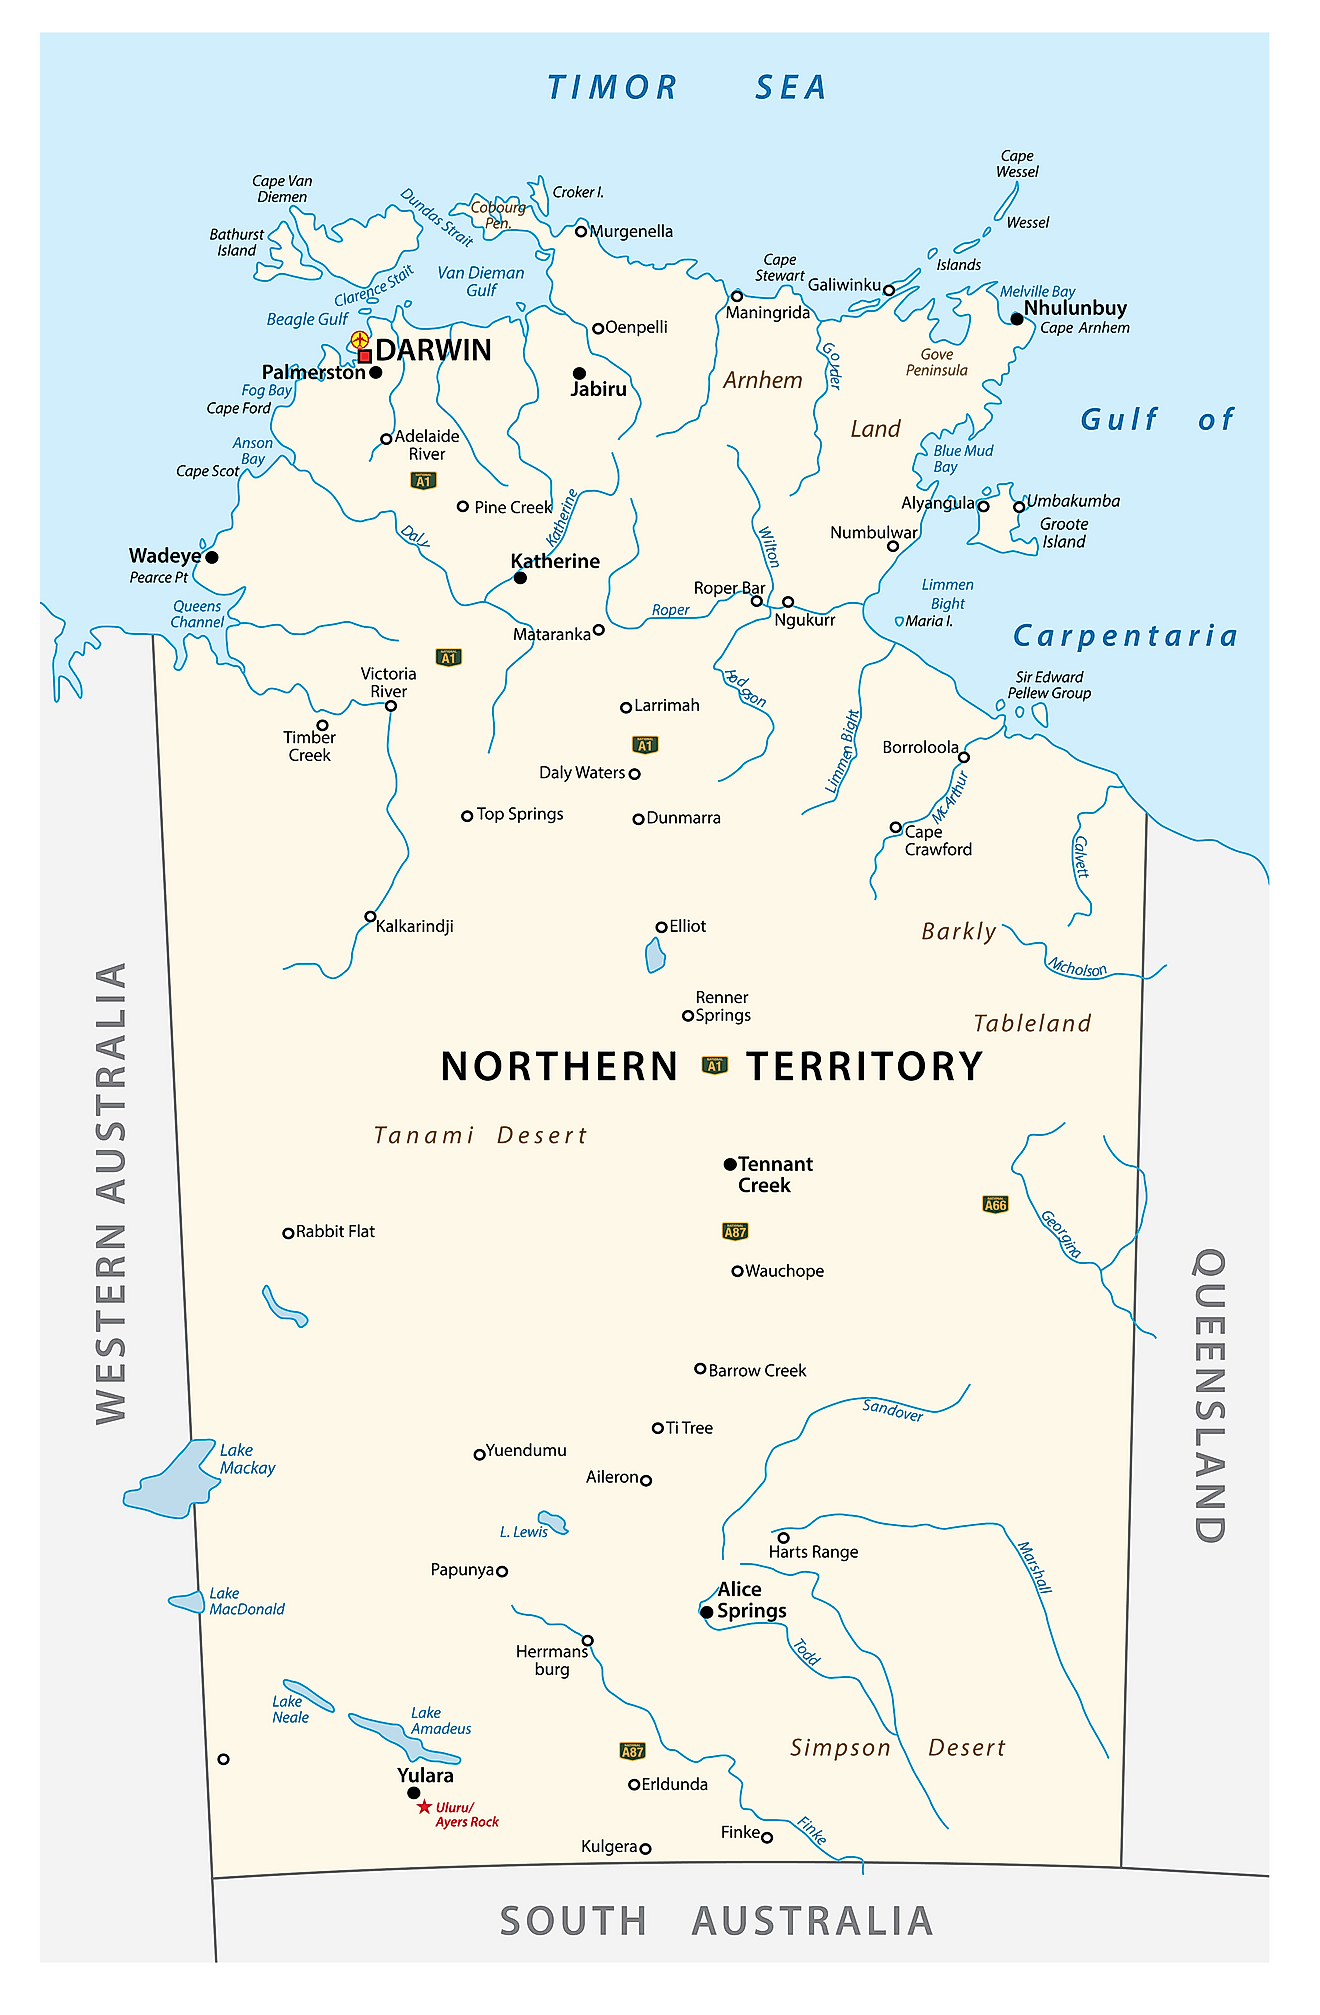 Administrative Map of Northern Territory showing its various cities/towns including the capital city - Darwin